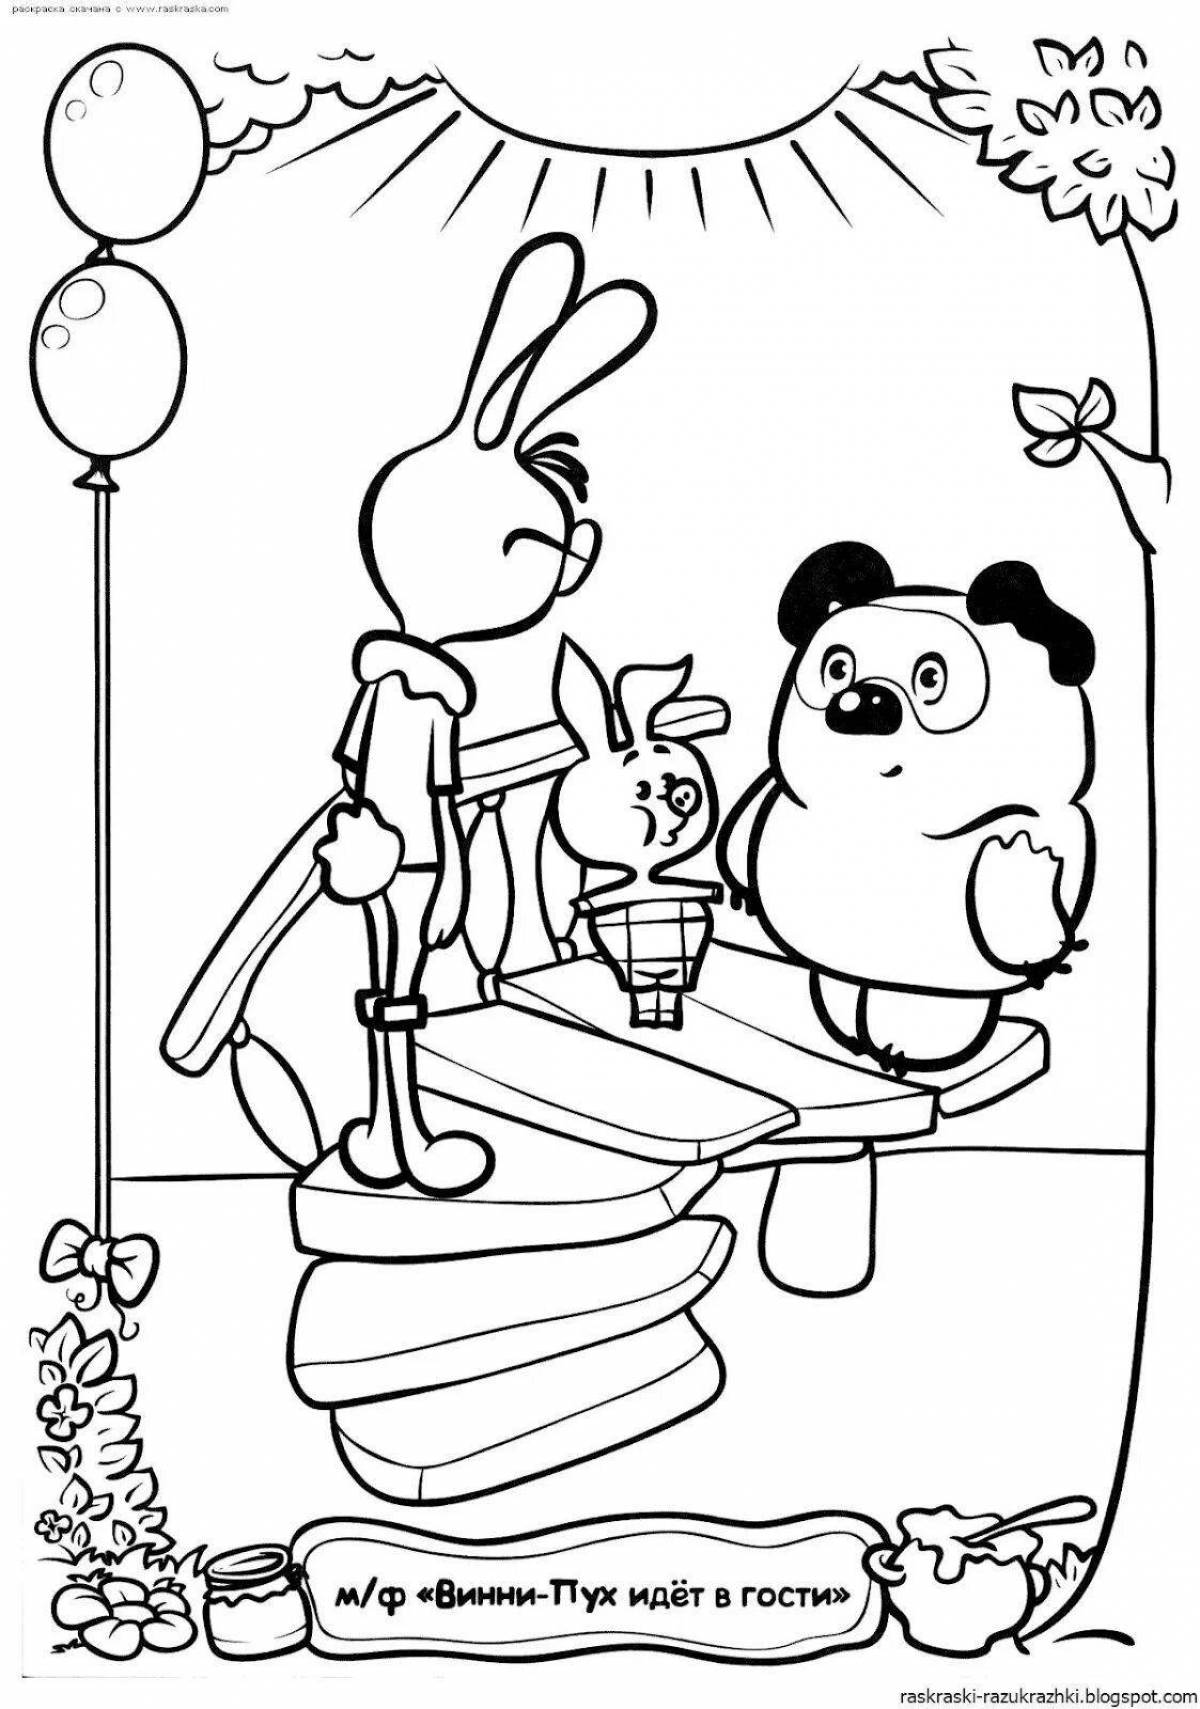 Amazing Winnie the Pooh coloring book for kids